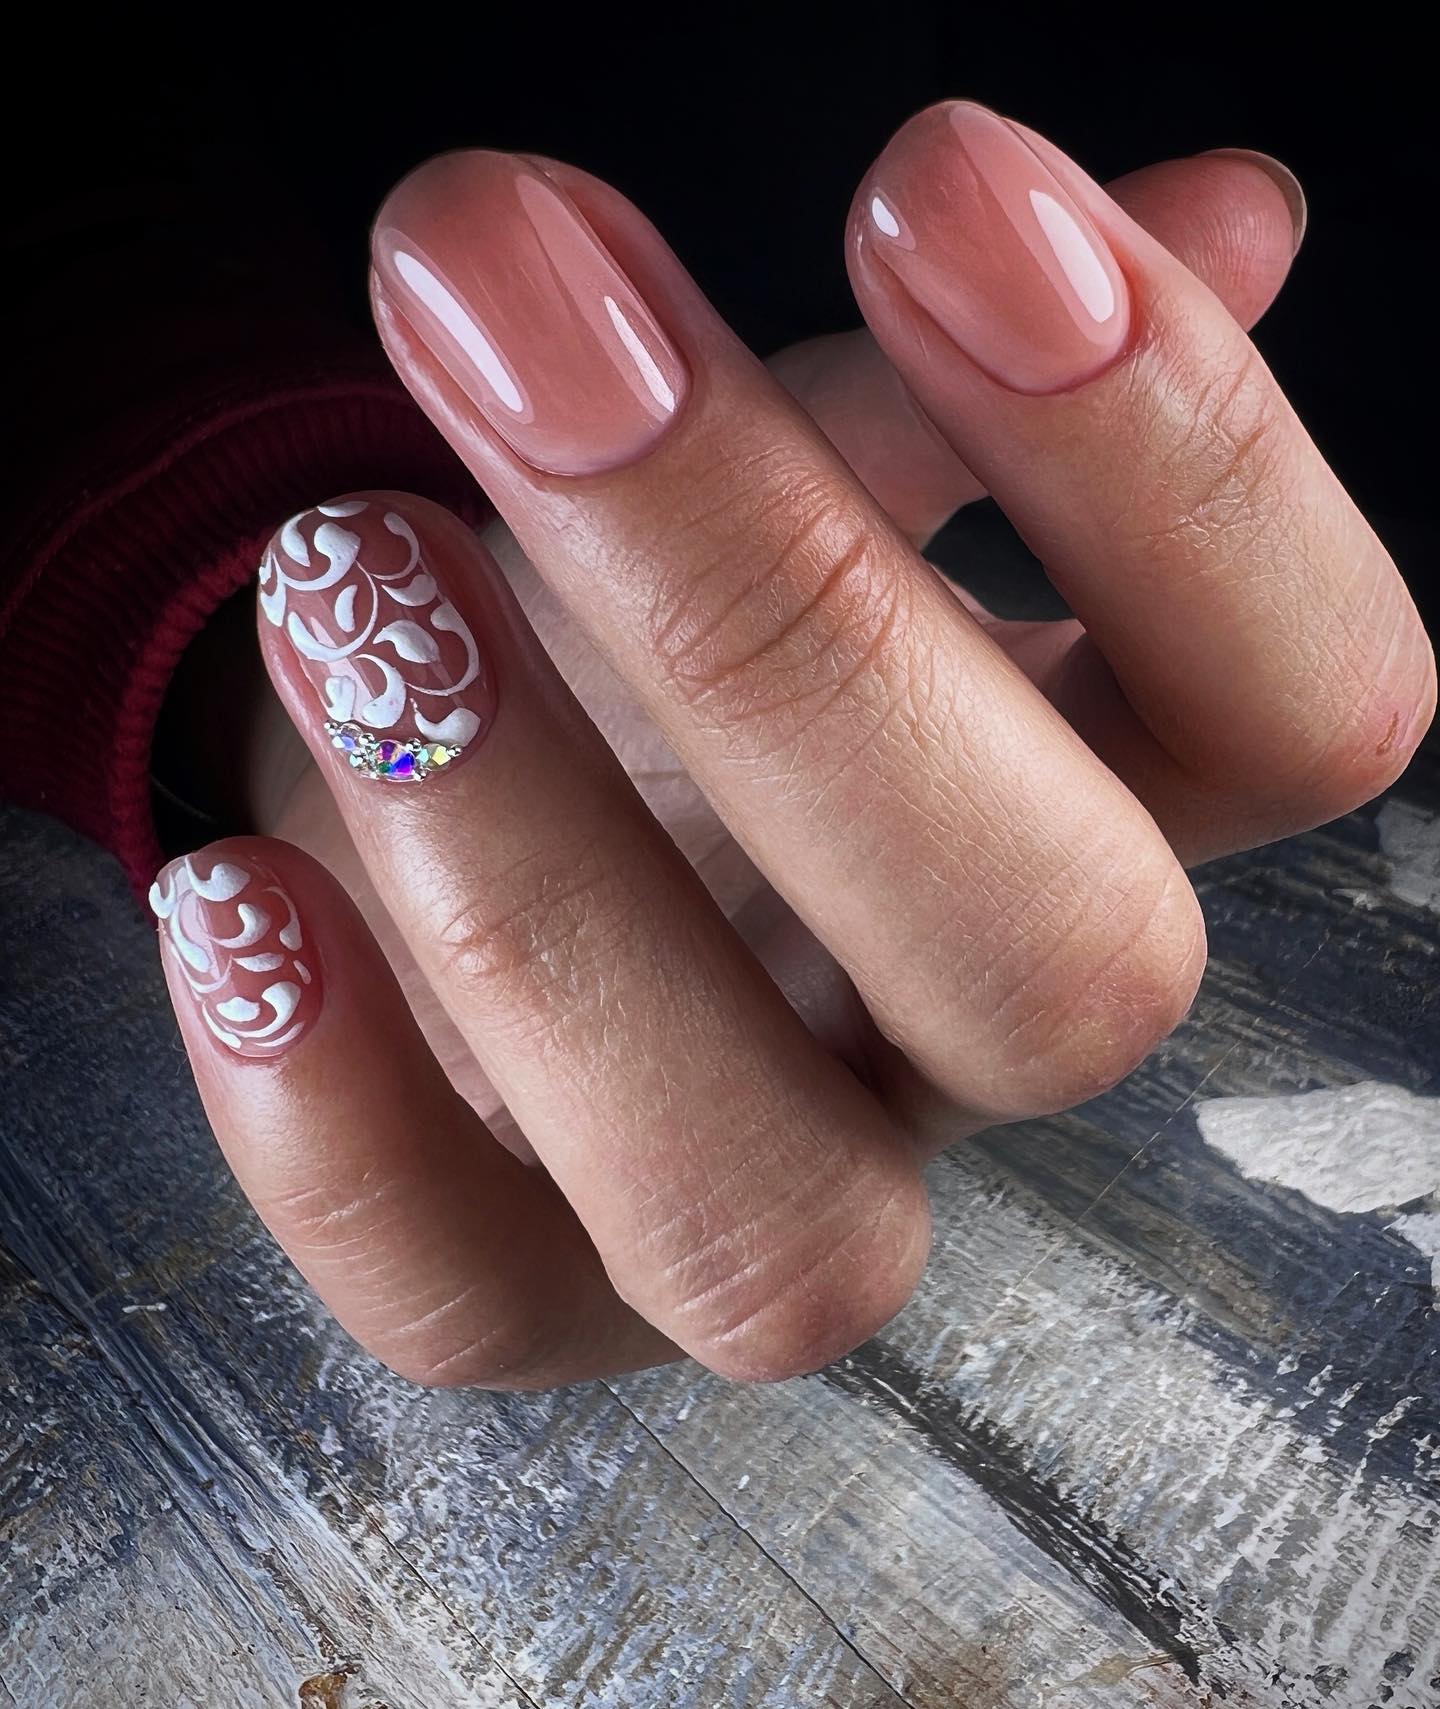 Lace Accent on Nails